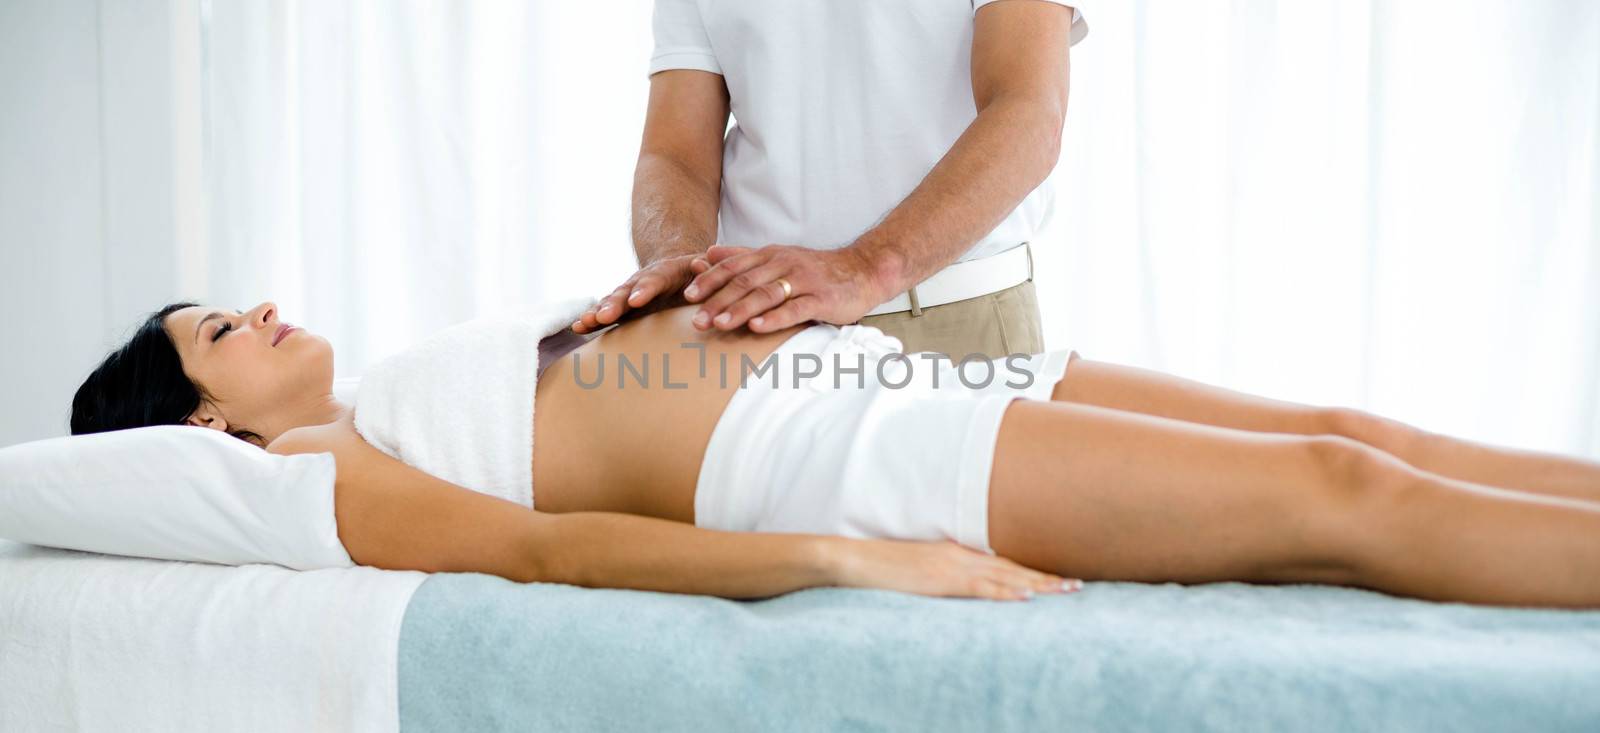 Pregnant woman receiving a stomach massage from masseur by Wavebreakmedia